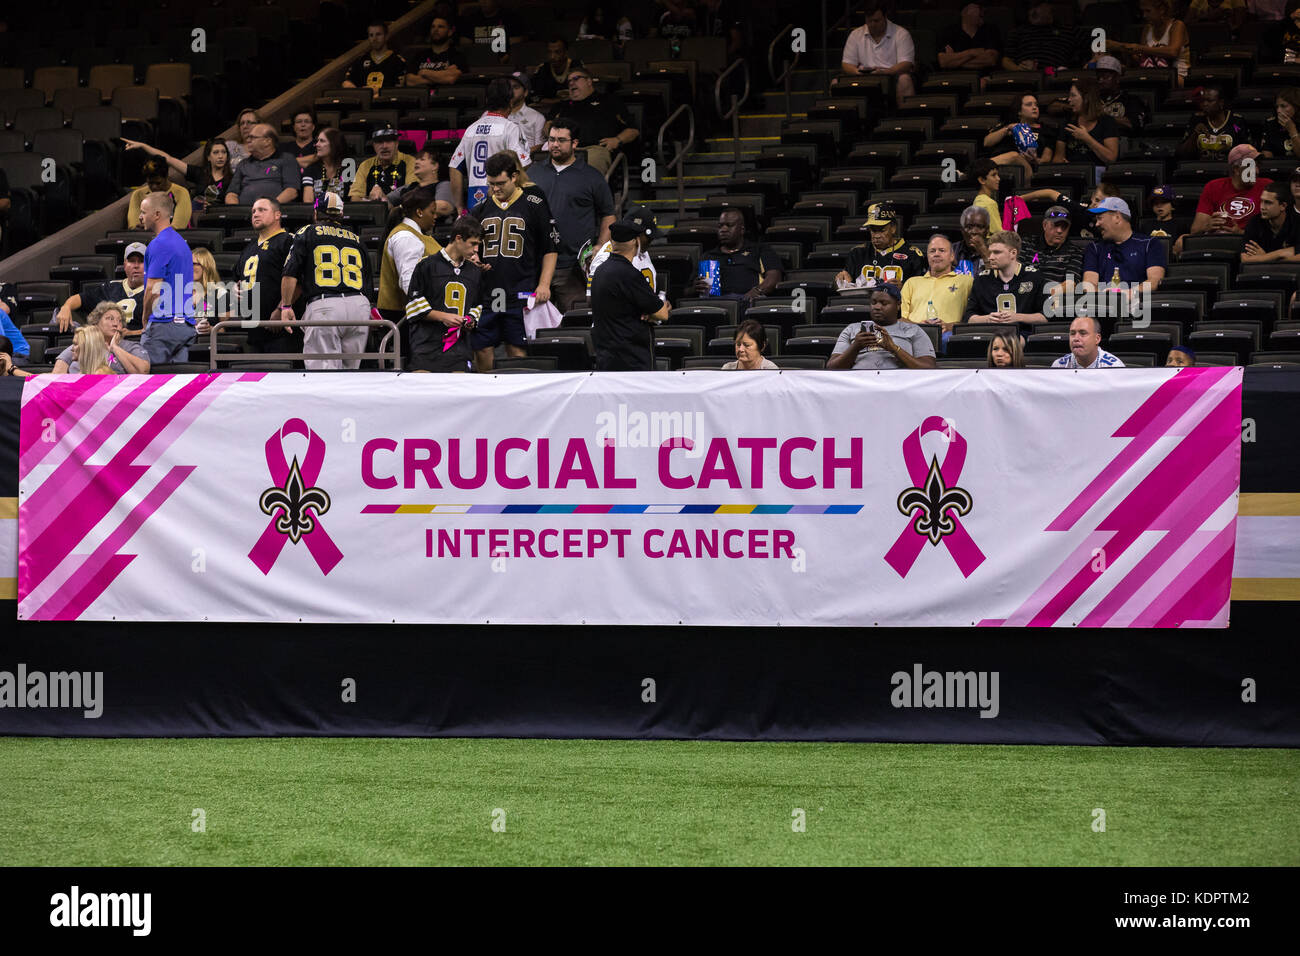 October 15, 2017 - NFL Crucial Catch campaign banner during the first half of the game between the Detroit Lions and the New Orleans Saints at the Mercedes-Benz Superdome in New Orleans, LA. Stephen Lew/CSM Stock Photo